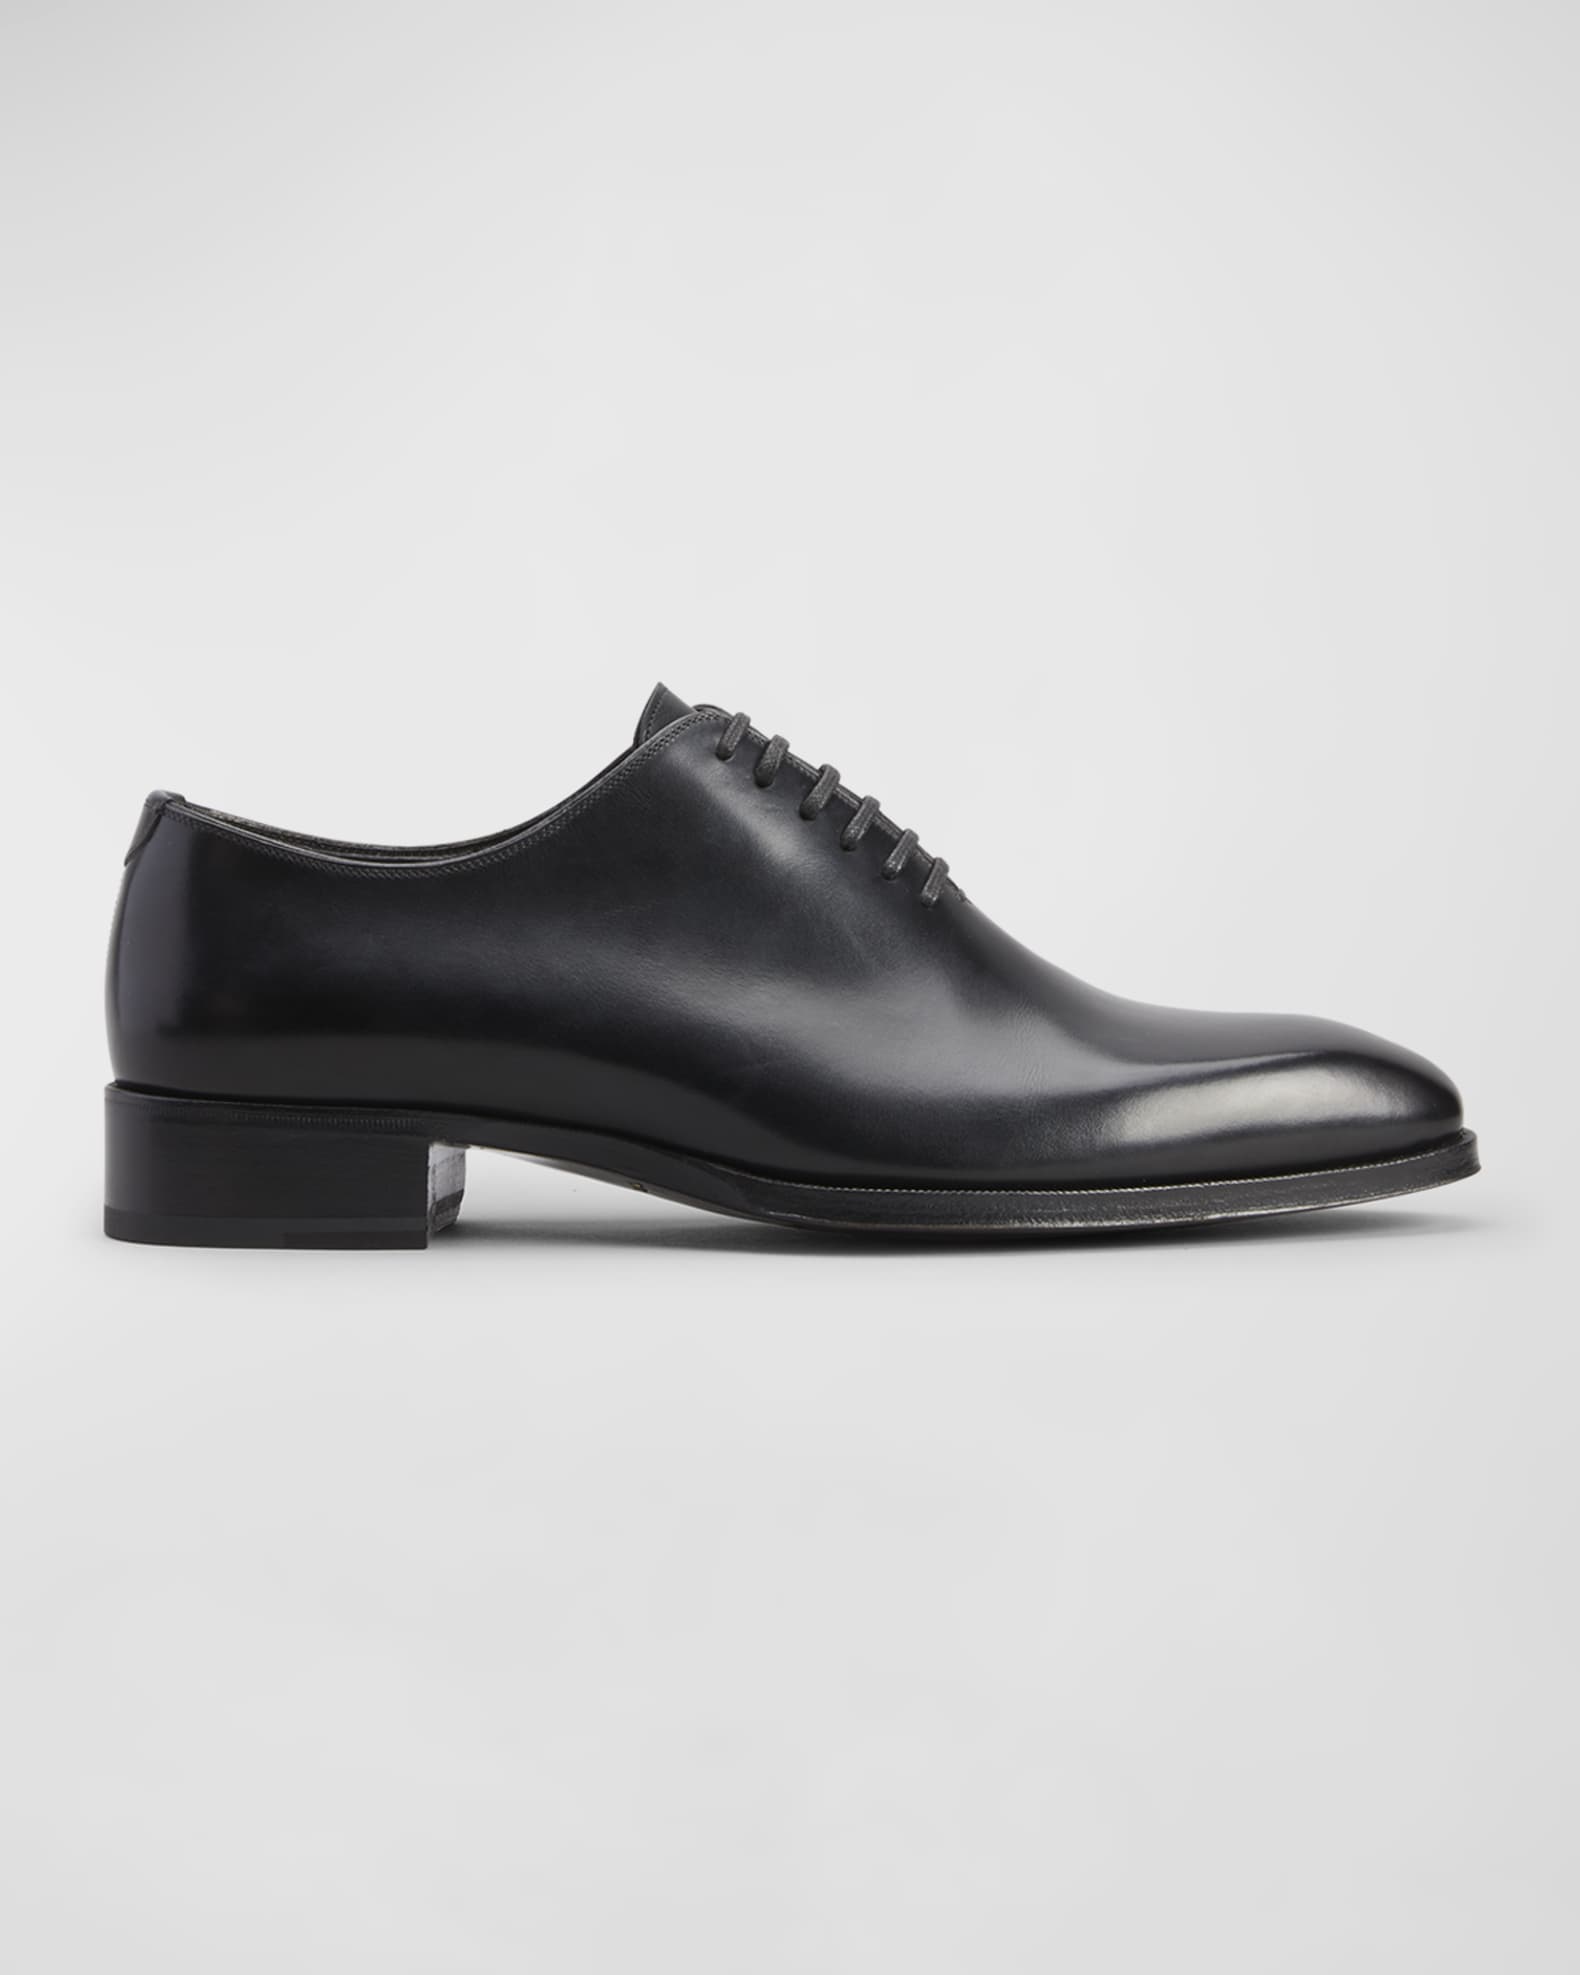 TOM FORD Men's Elkan Burnished Leather Oxfords | Neiman Marcus